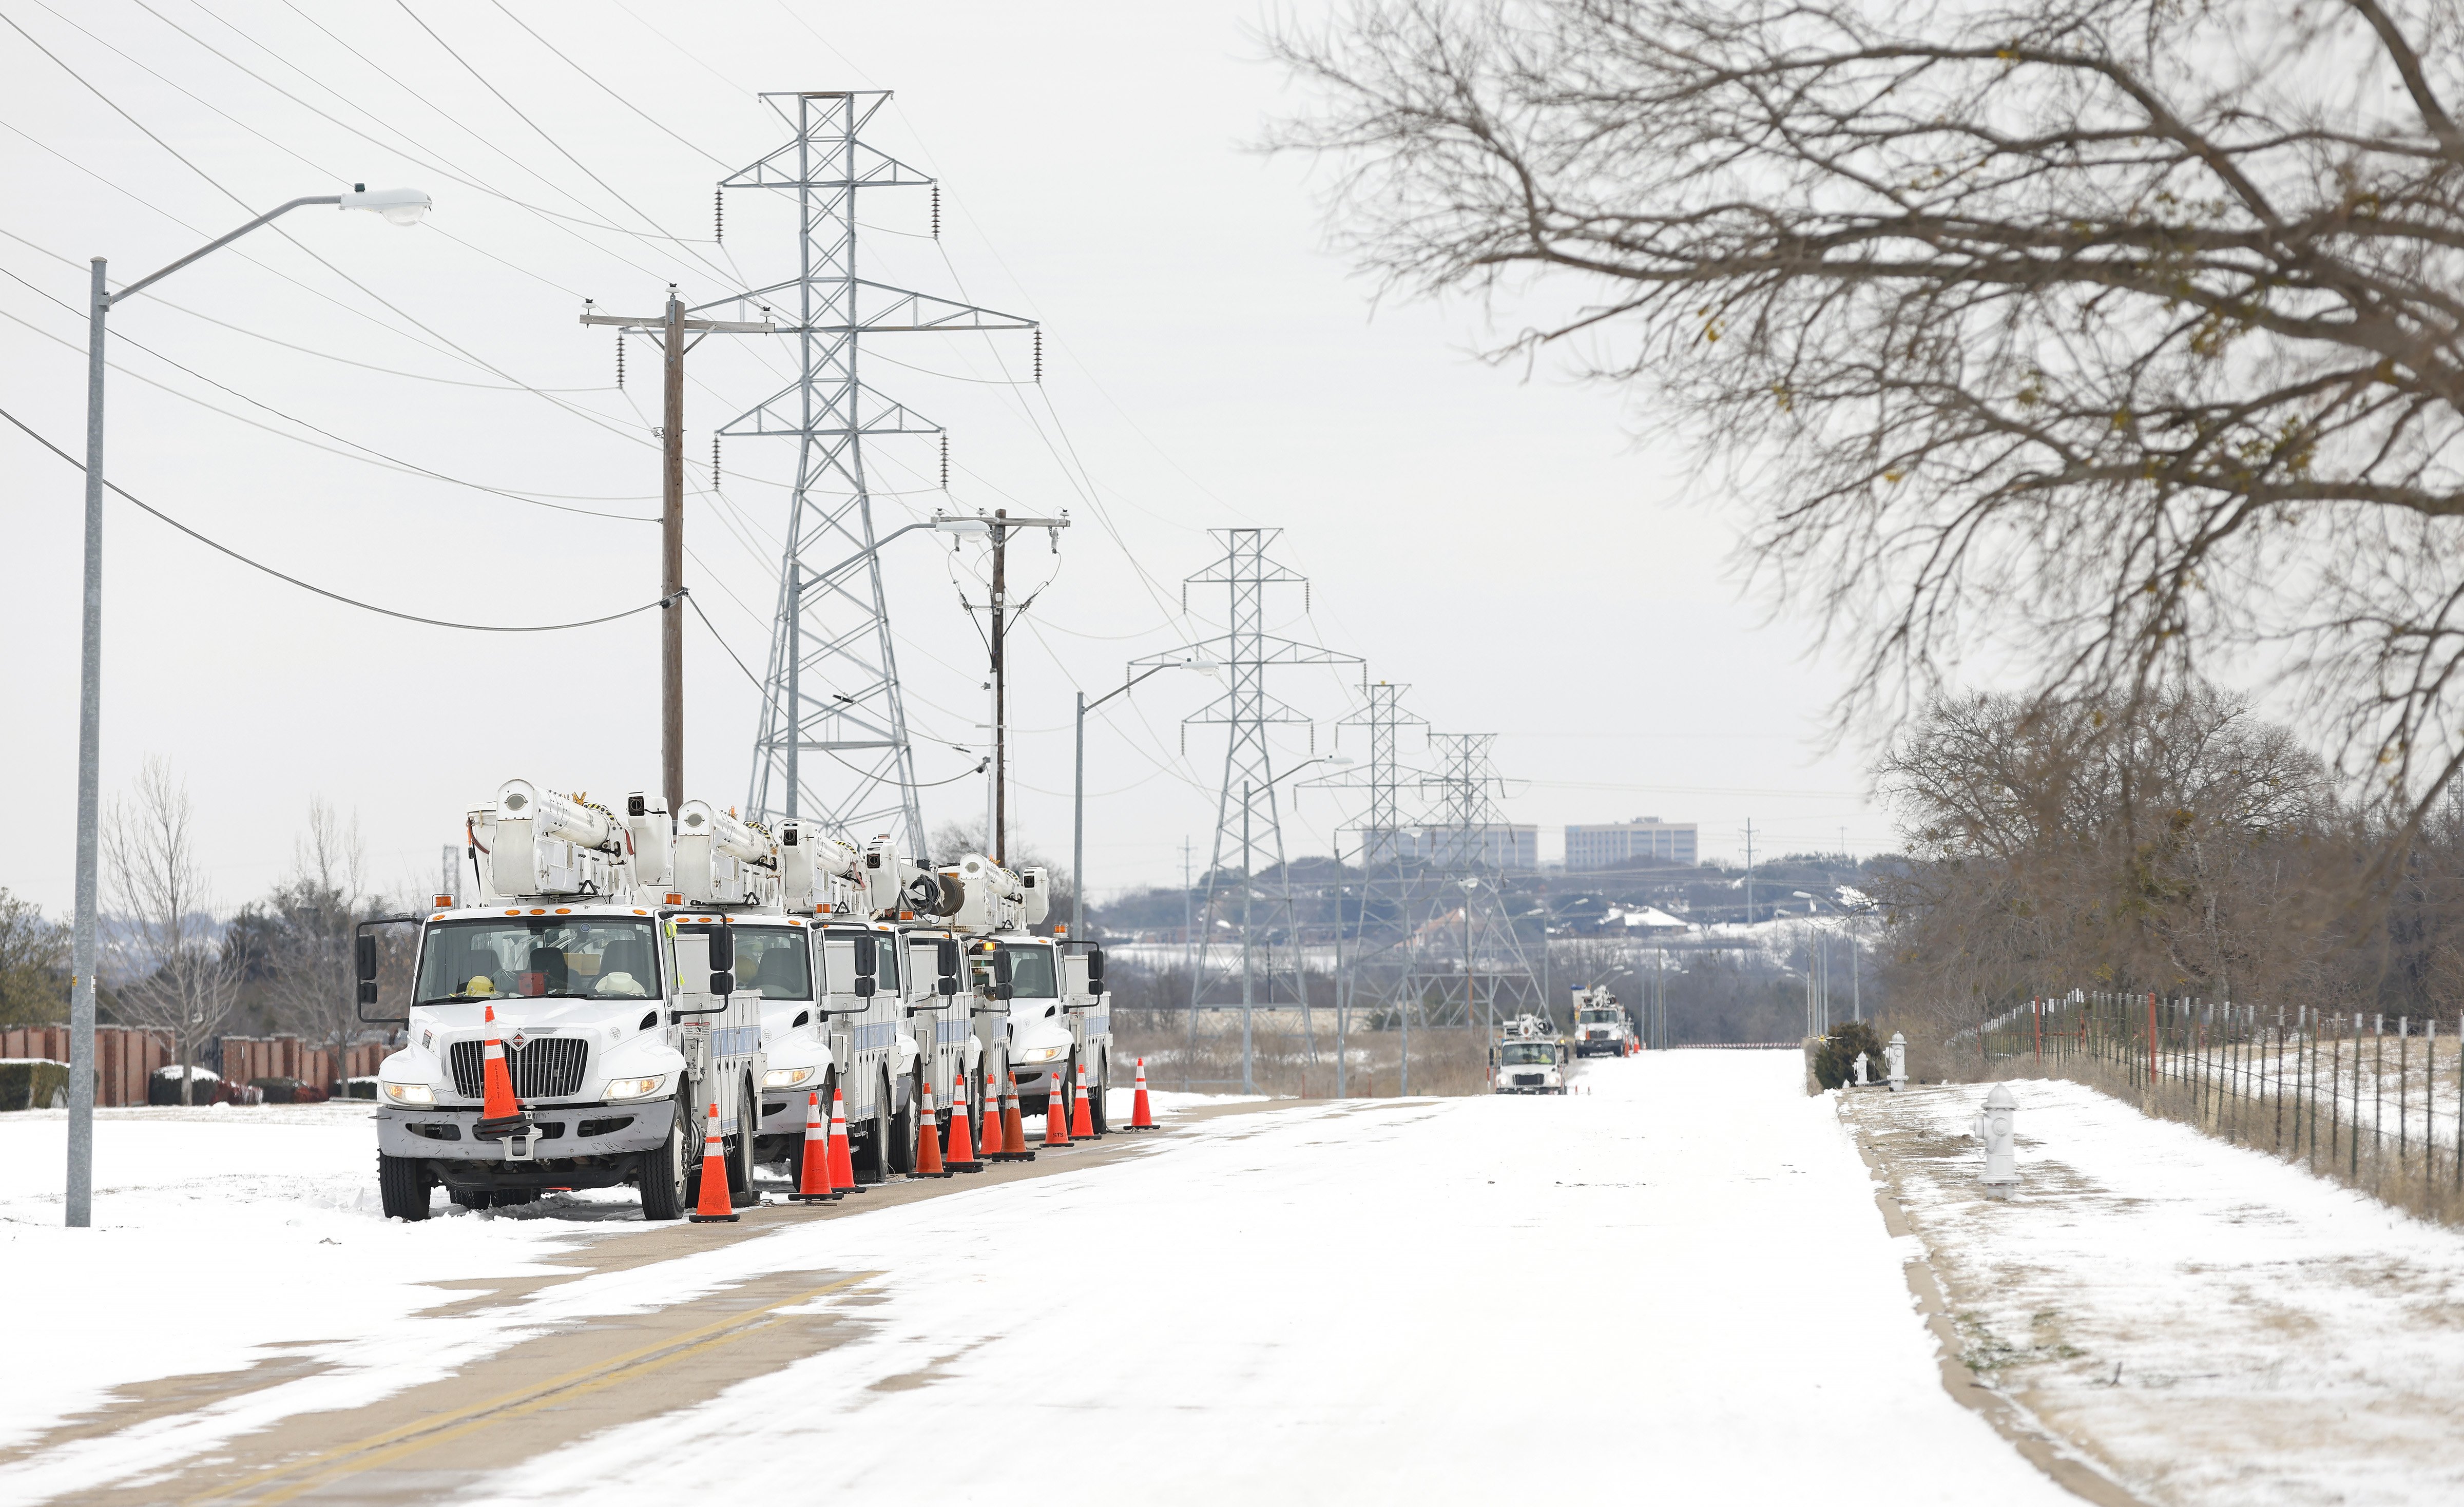 Pike Electric service trucks line up after the Uri snowstorm on February 16, 2021, in Fort Worth, Texas | Photo: Ron Jenkins/Getty Images